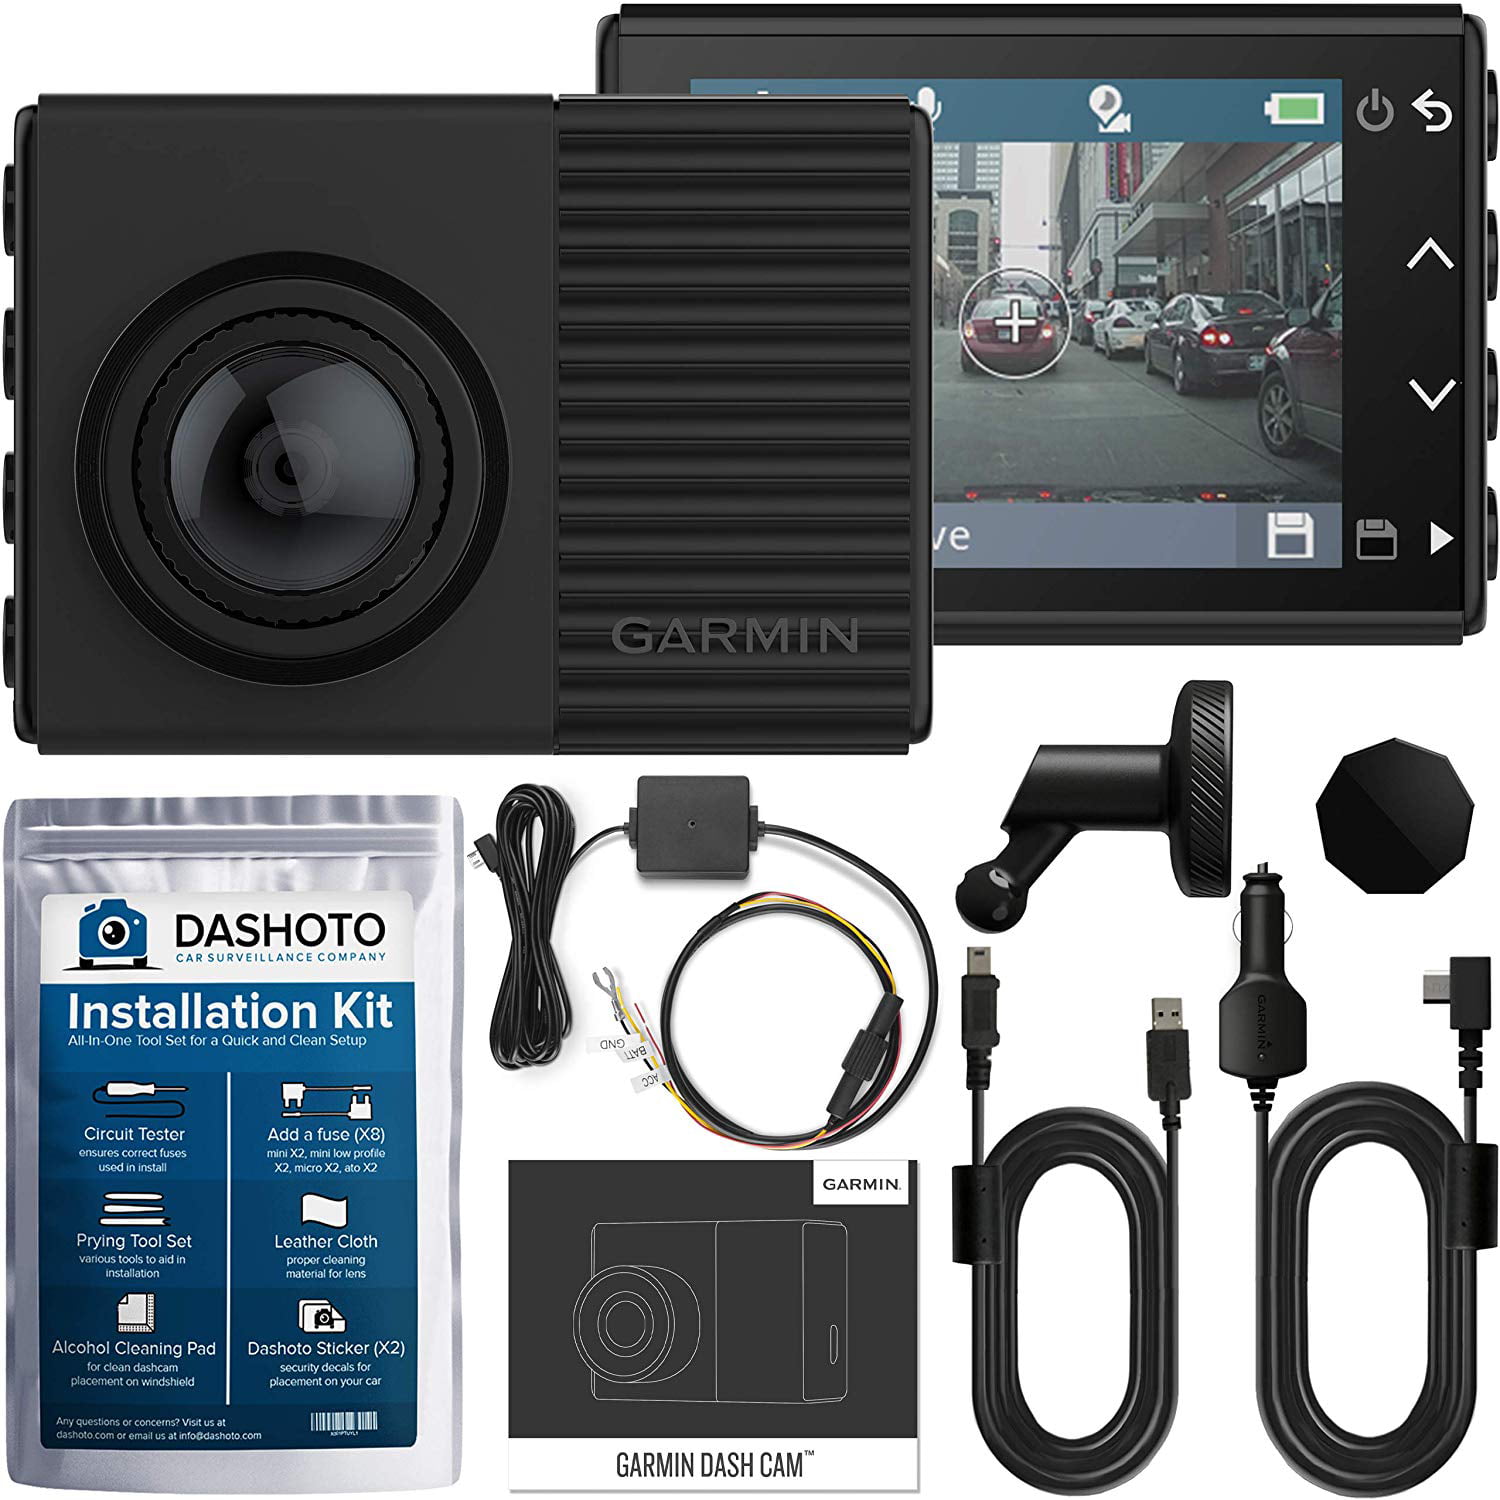 Garmin 66 Cam 66W HDR 1440P Ultrawide Bundle | 180 Degree Viewing Angle | WiFi 1440P QHD GPS Control | Parking Mode Cable and Installation Kit Included (New 2019) - Walmart.com